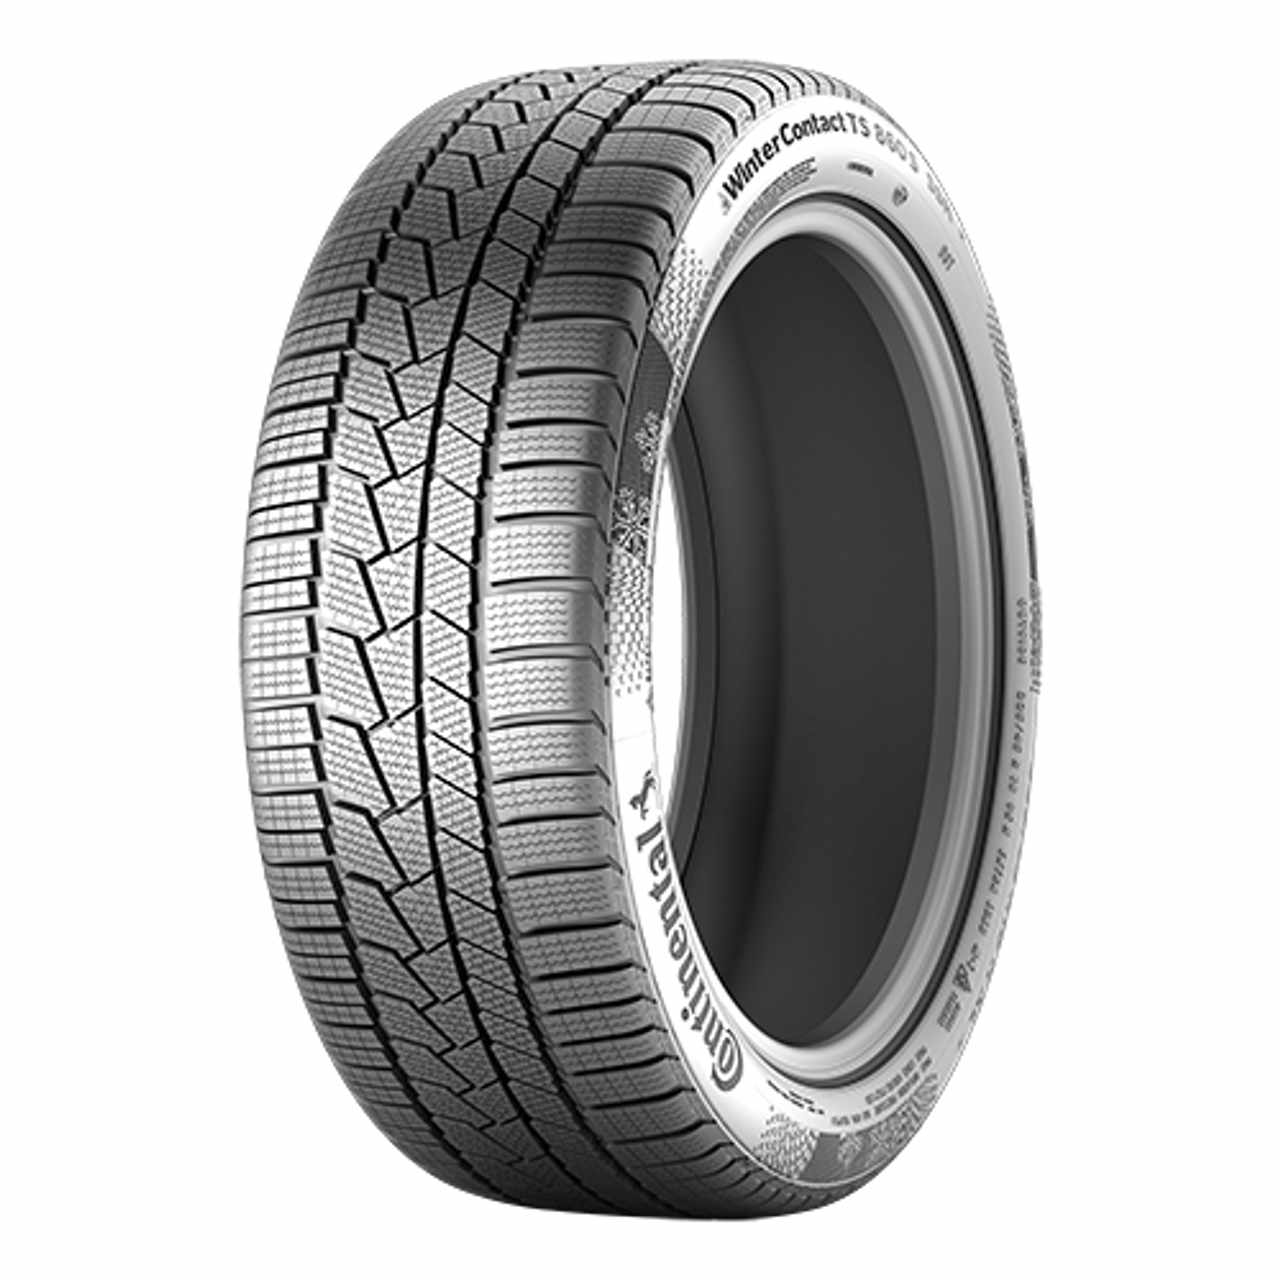 CONTINENTAL WINTERCONTACT TS 860 S (NF0) (EVc) 275/45R19 108V FR BSW XL